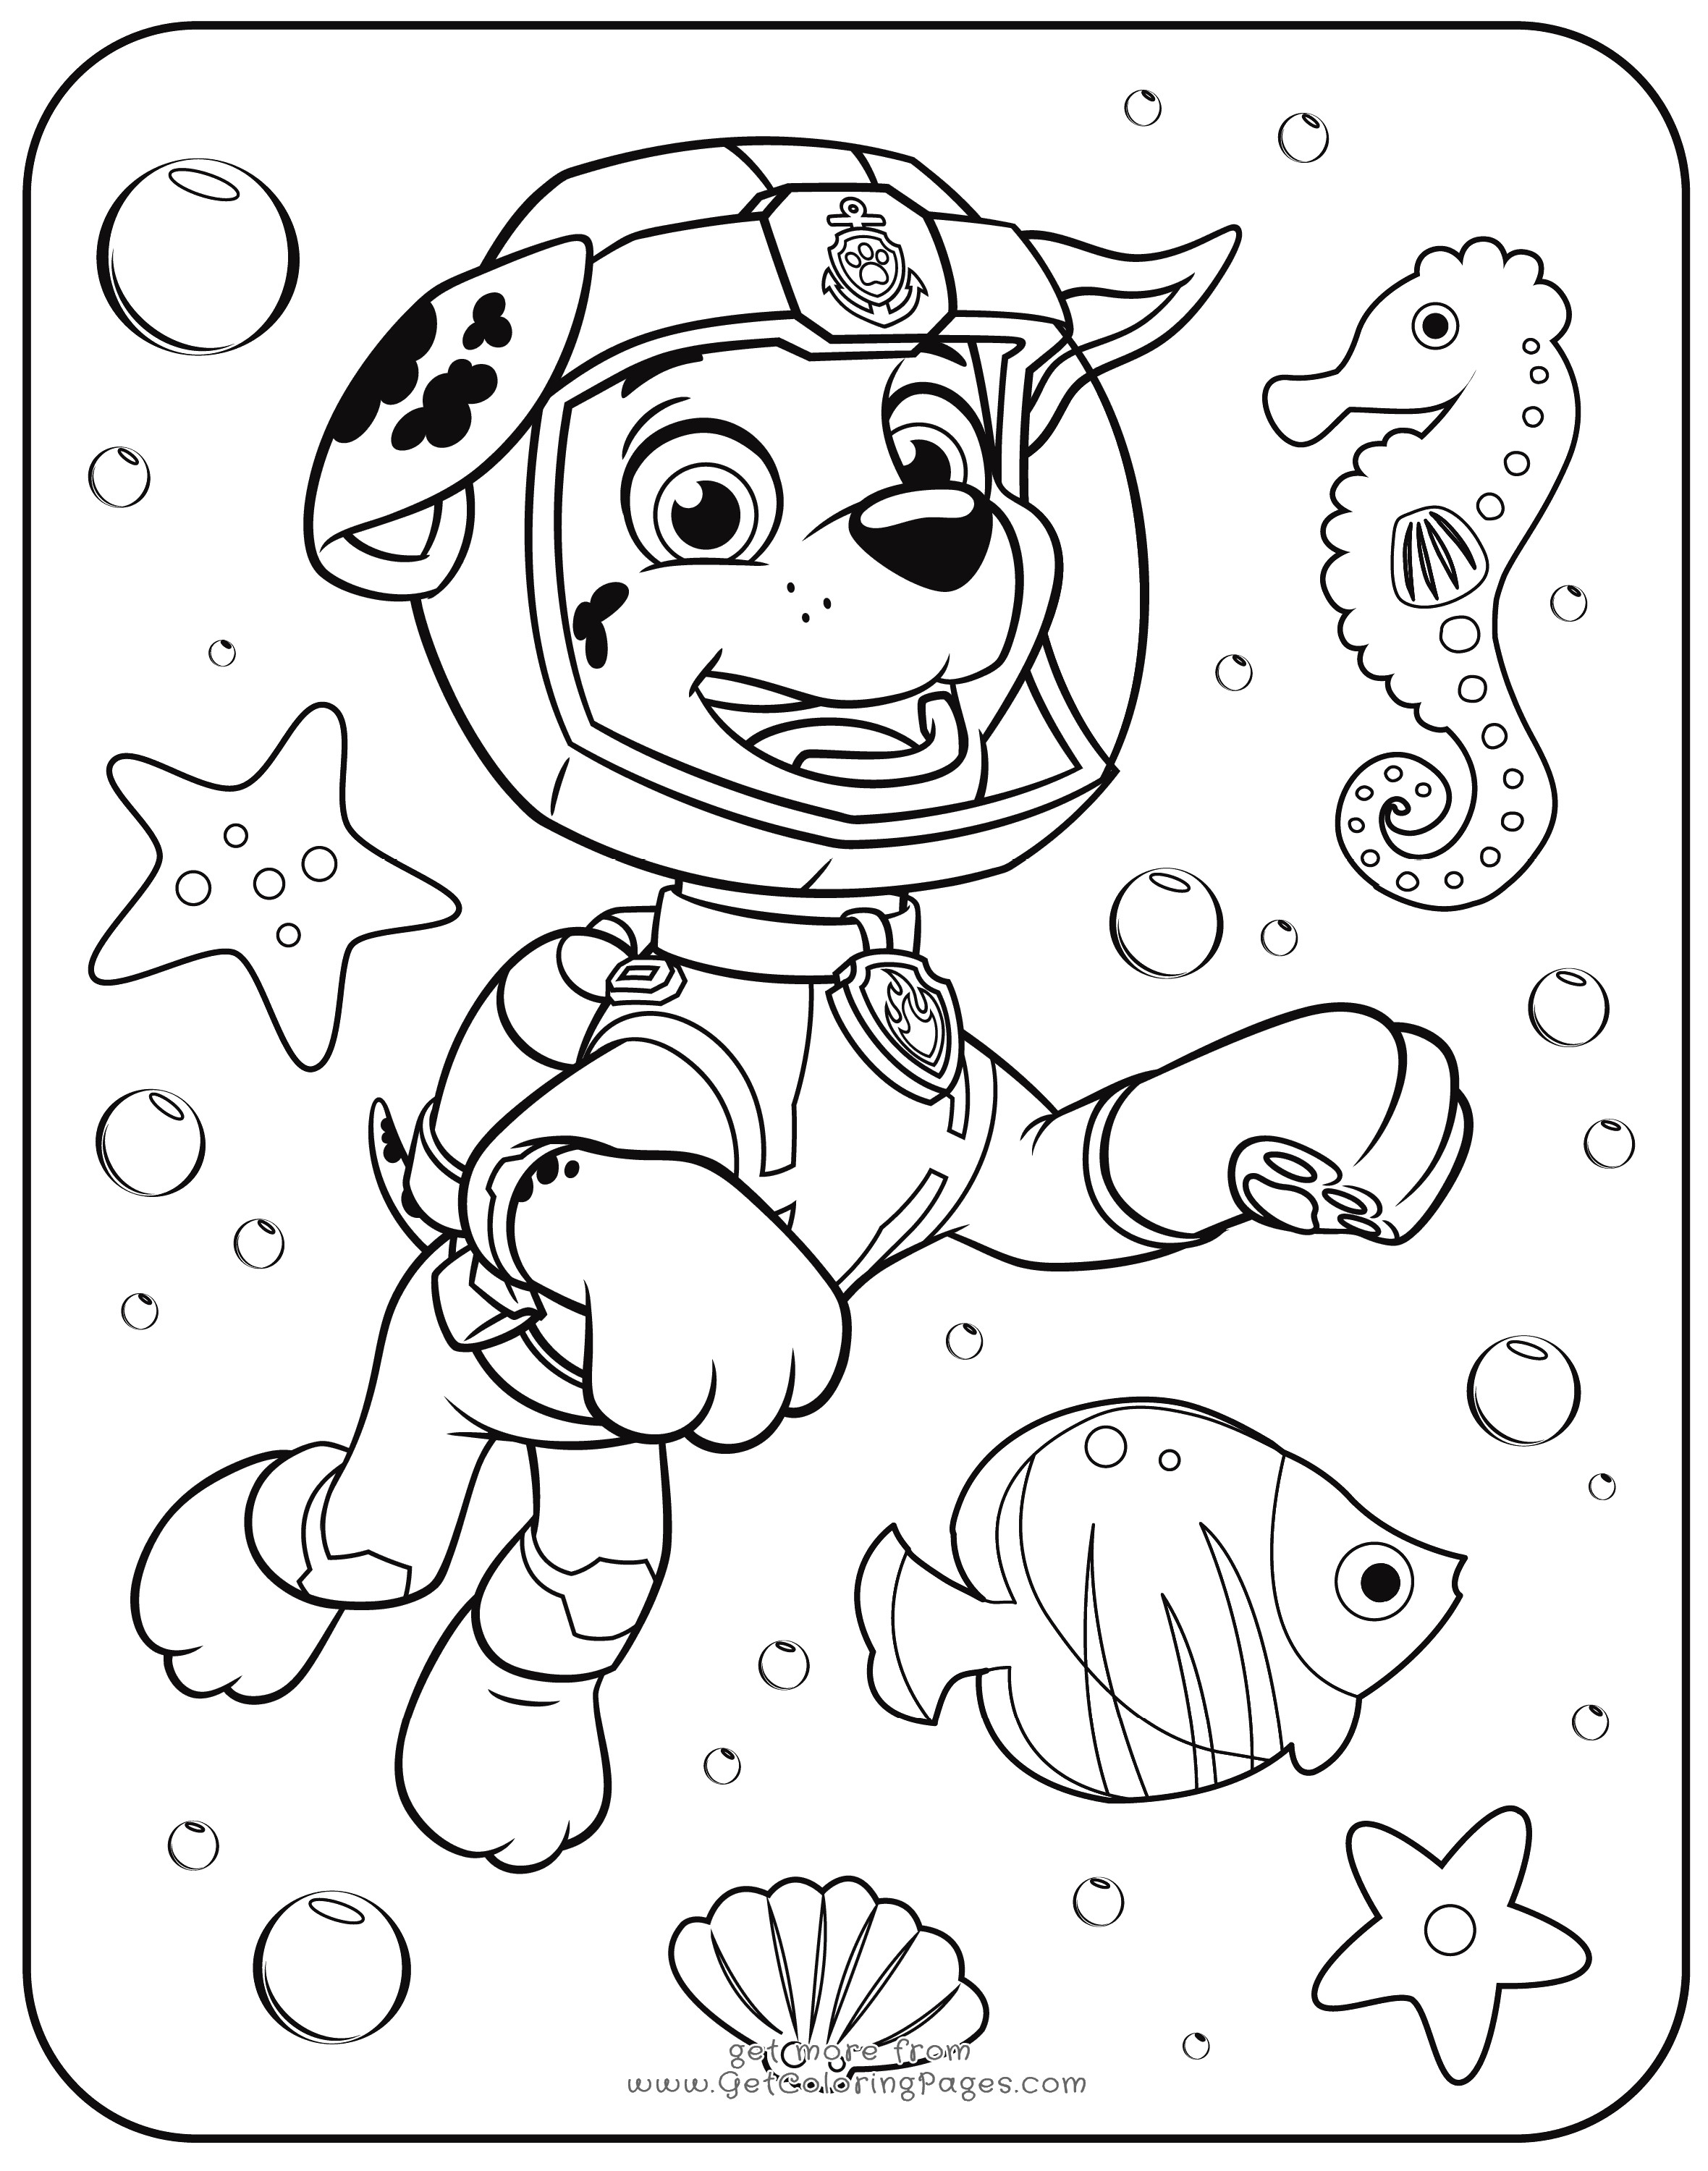 Paw Patrol Coloring Pages Marshall
 Free Printable Paw Patrol Coloring Pages For Kids